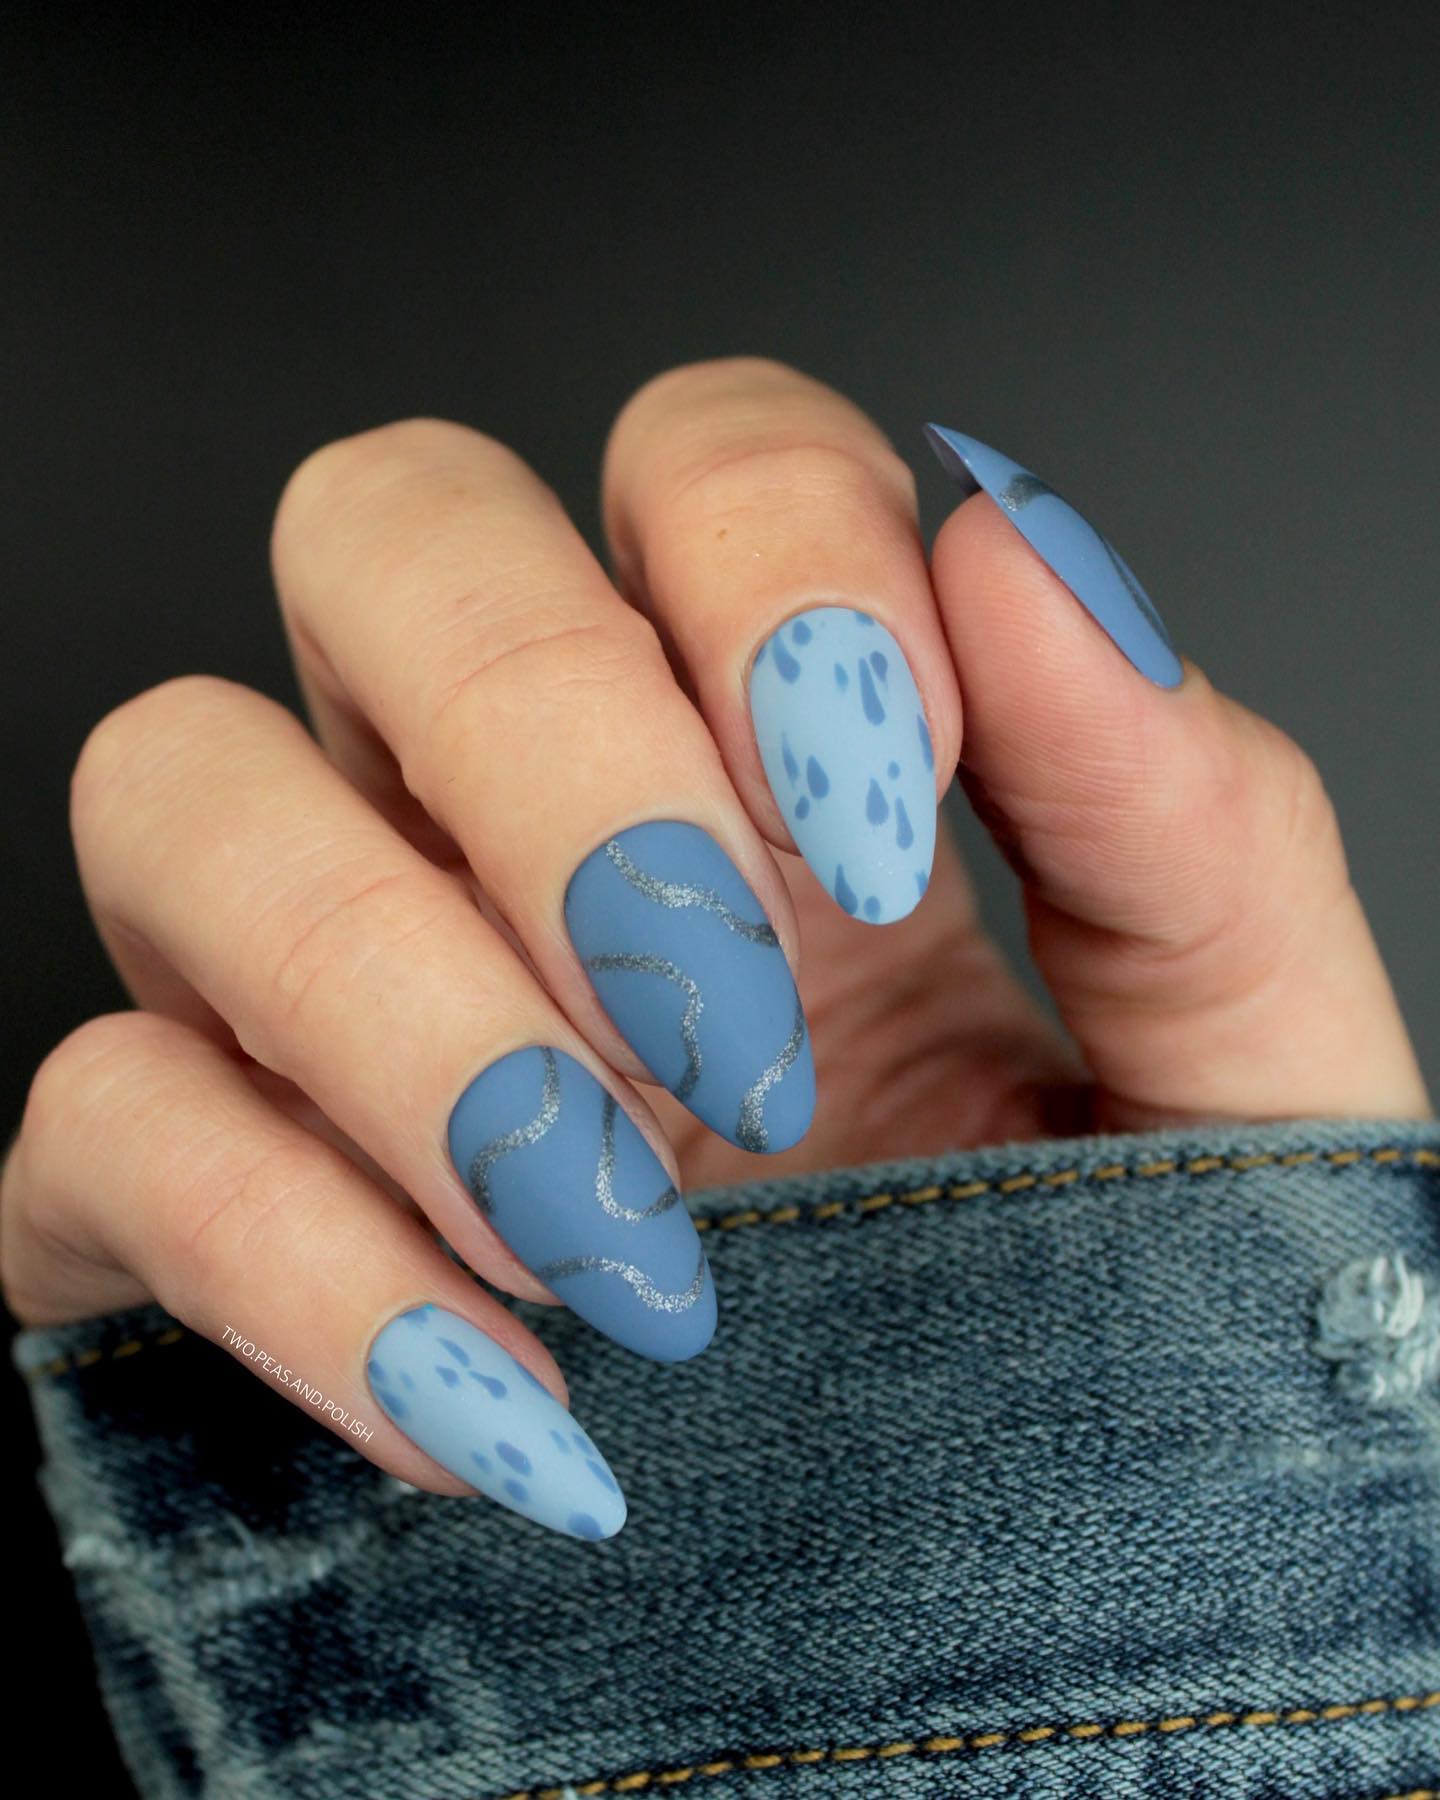 Raindrops nail art is a new but a creative art. In this design, raindrops look like they have dropped on the nails. Plus, silver swirls offers a chic look on blue matte nail polish.